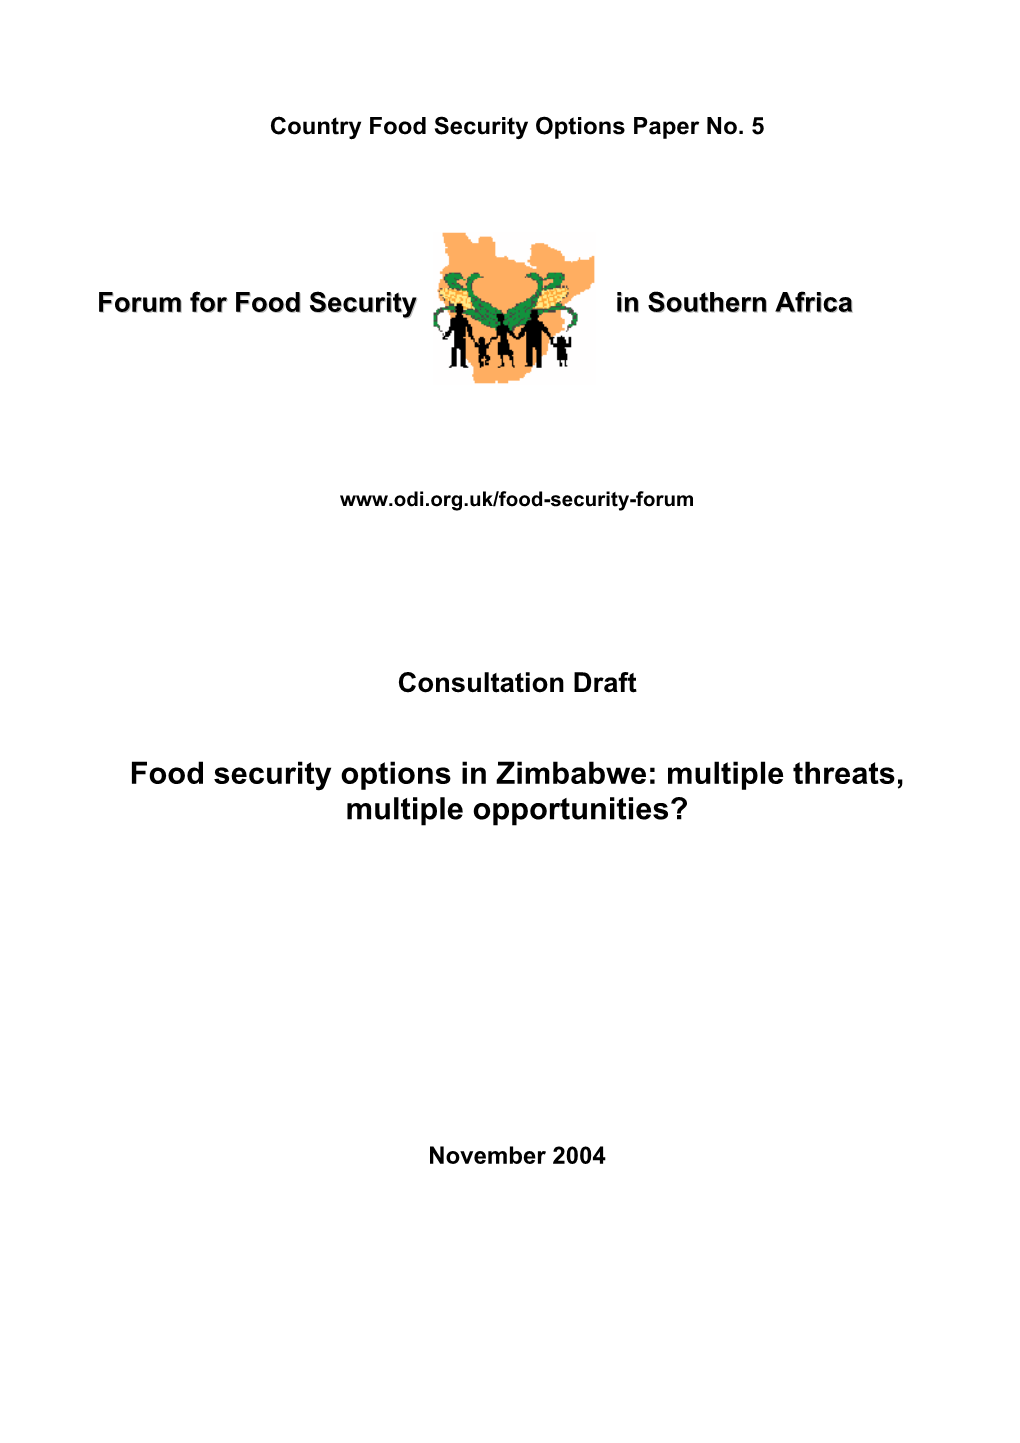 Food Security Options in Zimbabwe: Multiple Threats, Multiple Opportunities?